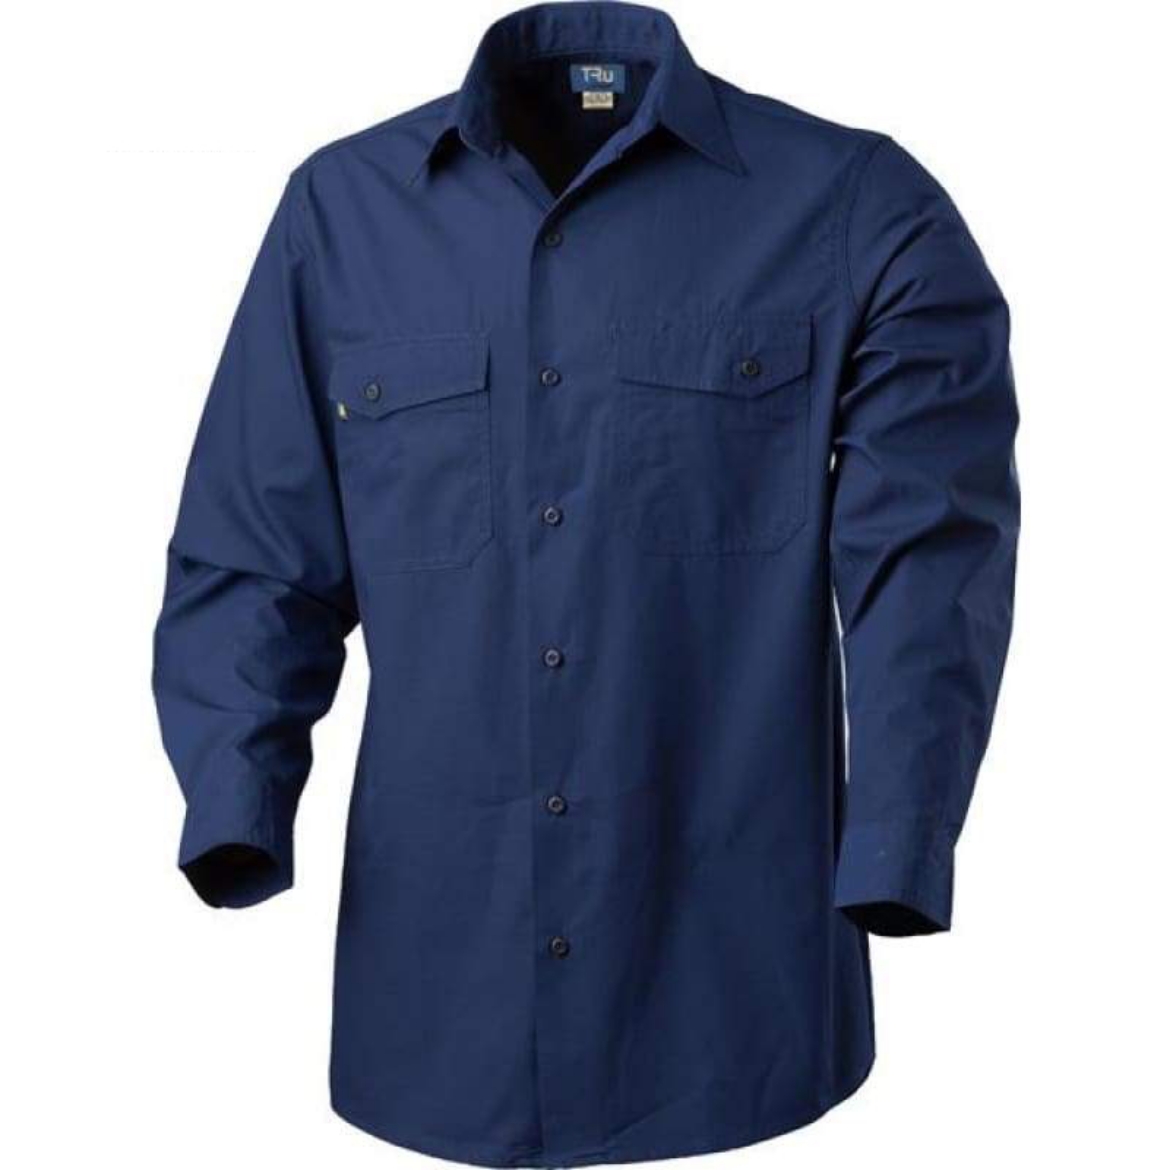 Picture of Tru Workwear, Shirt, Long Sleeve, Cool Rip-Stop, U/A Vents